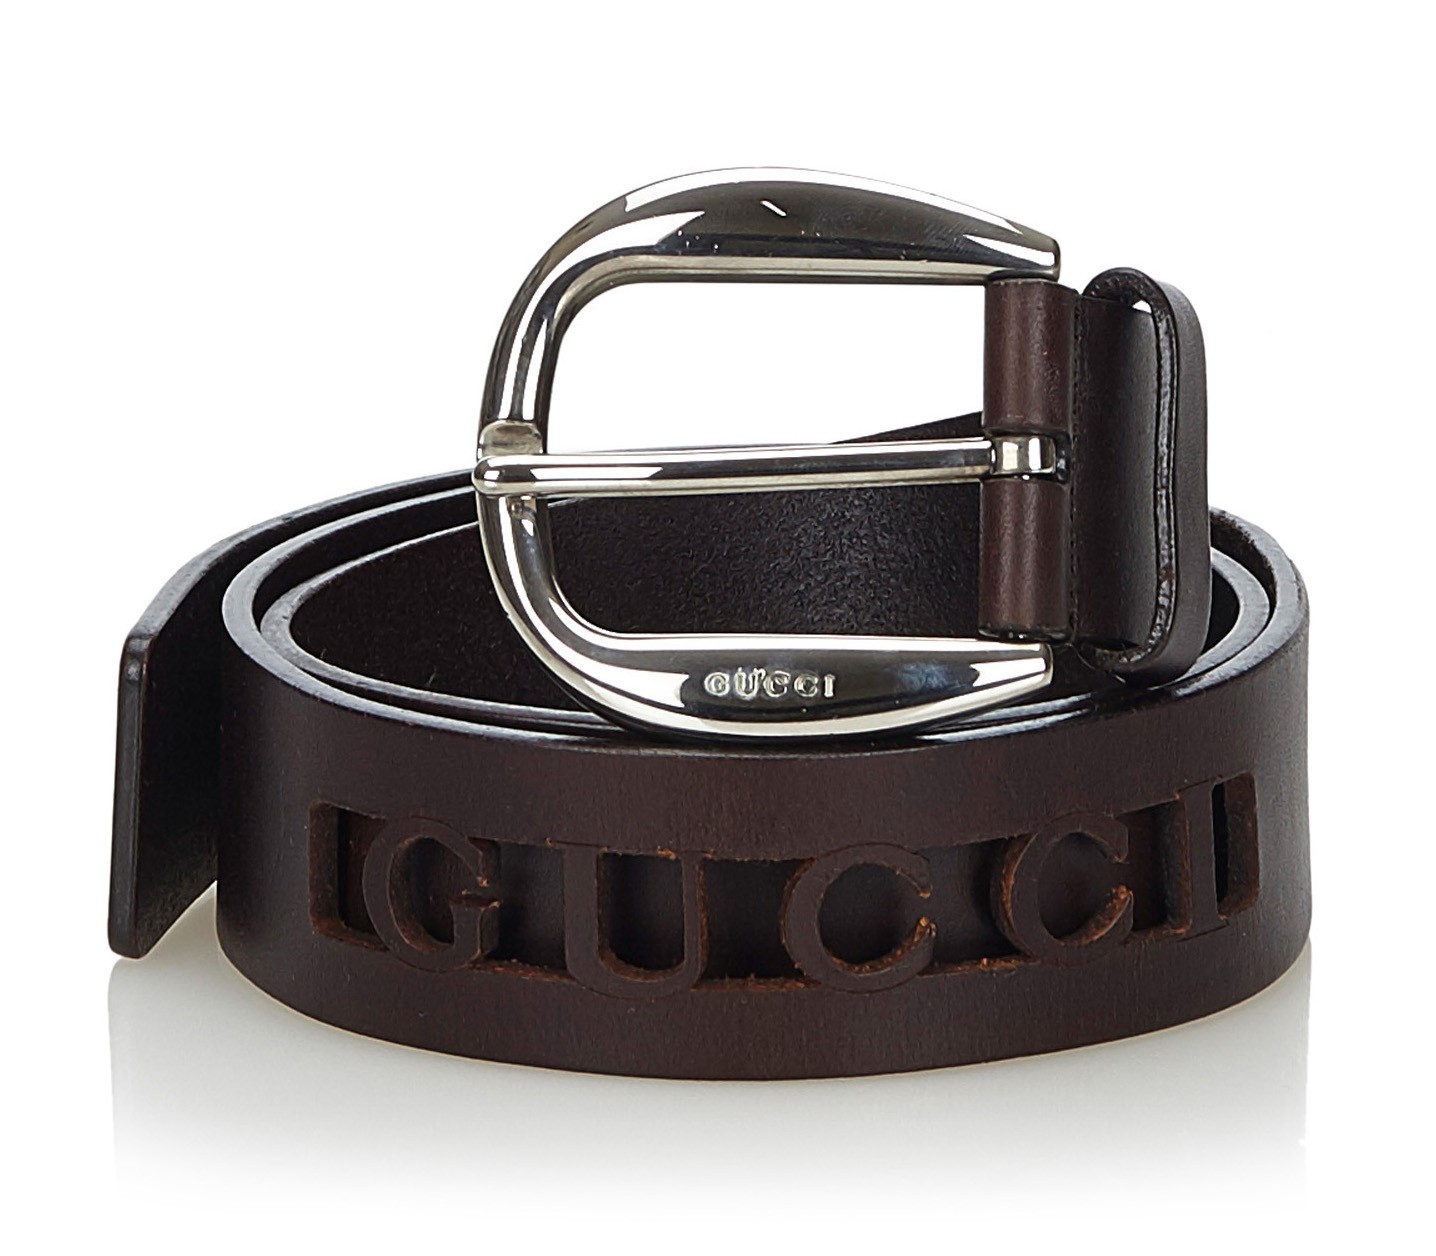 ANIYE BY: Vernis over belt in patent leather - White